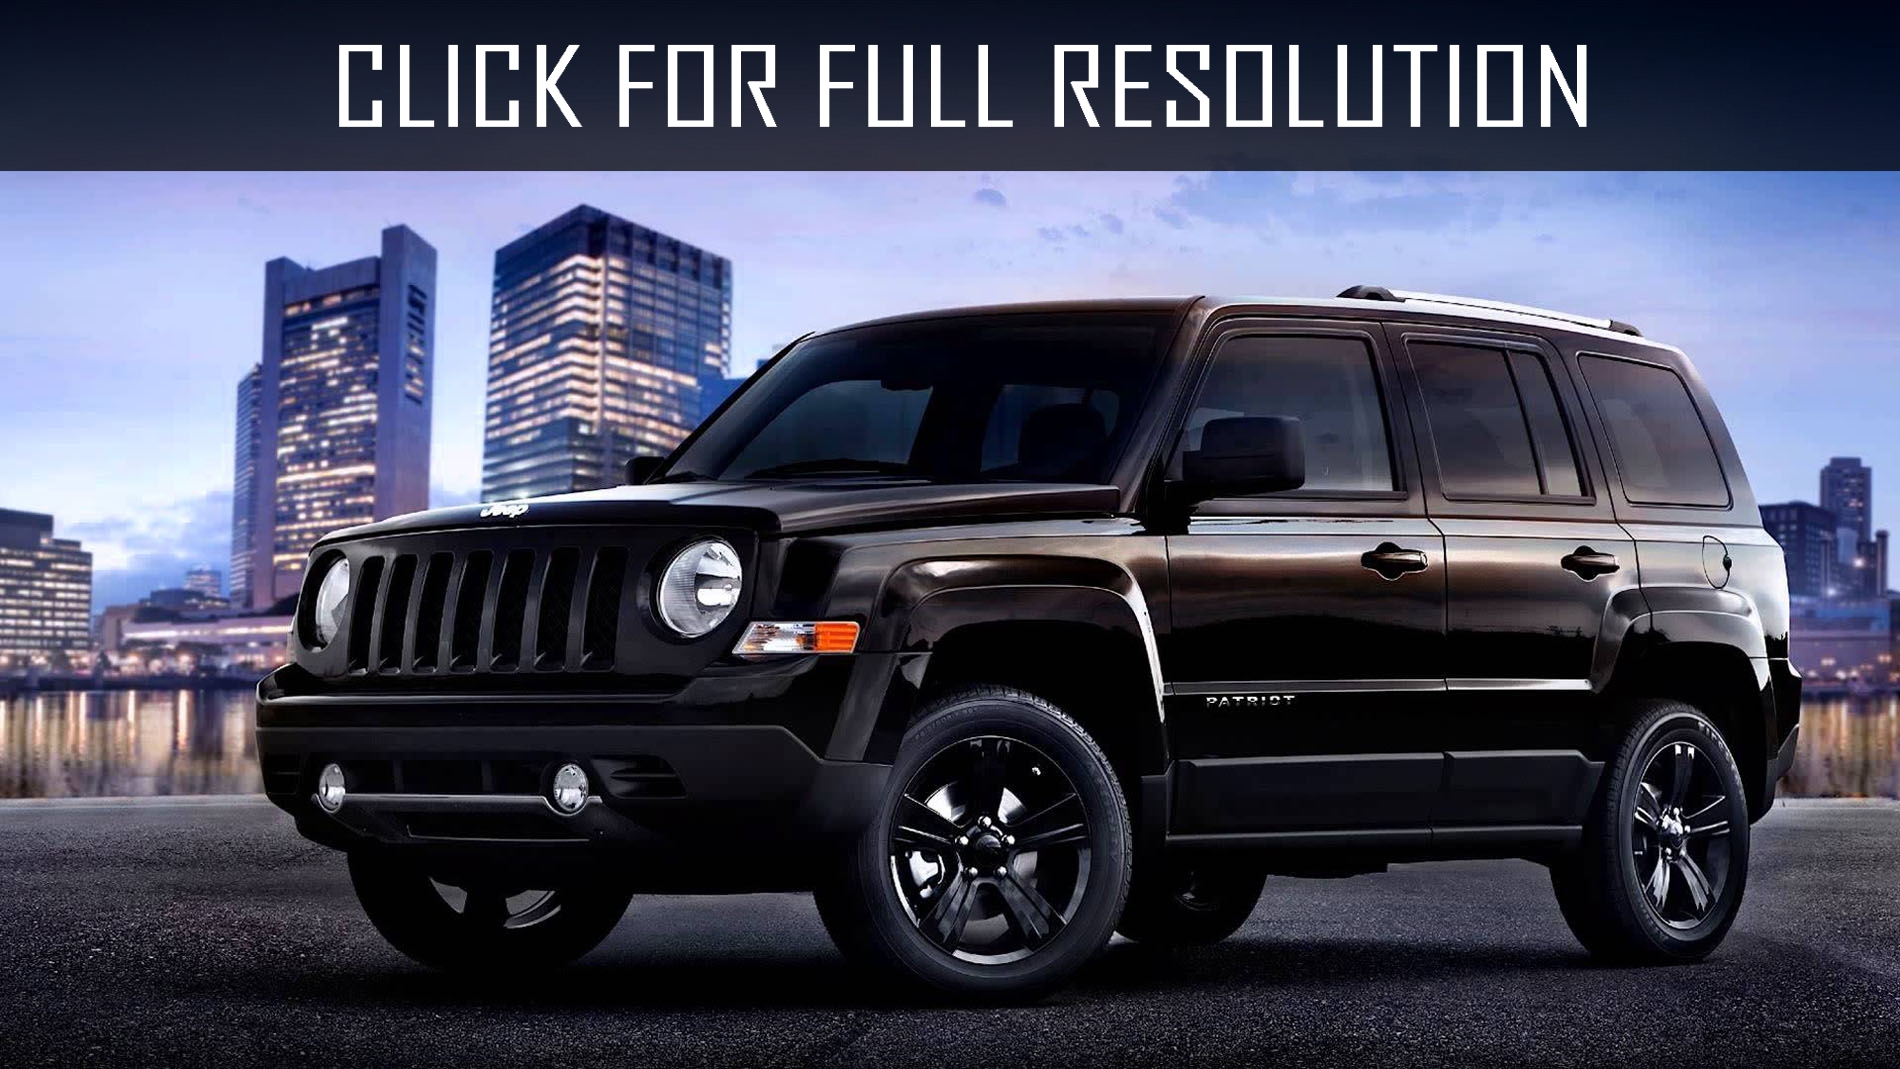 2017 Jeep Patriot Lifted